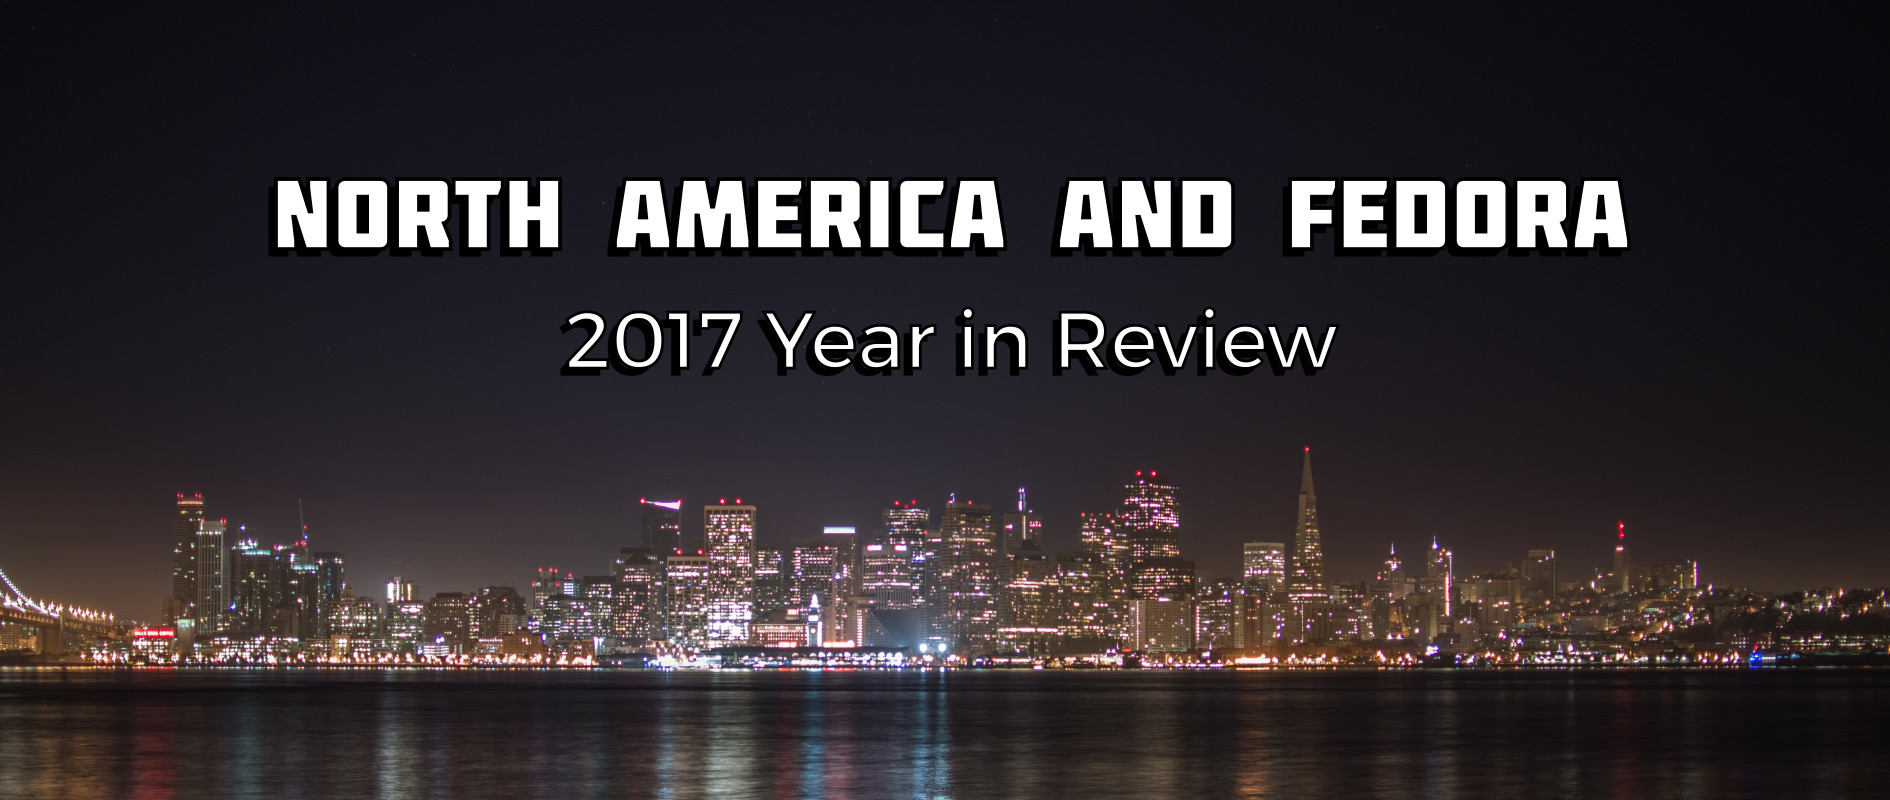 North America and Fedora: 2017 Year in Review